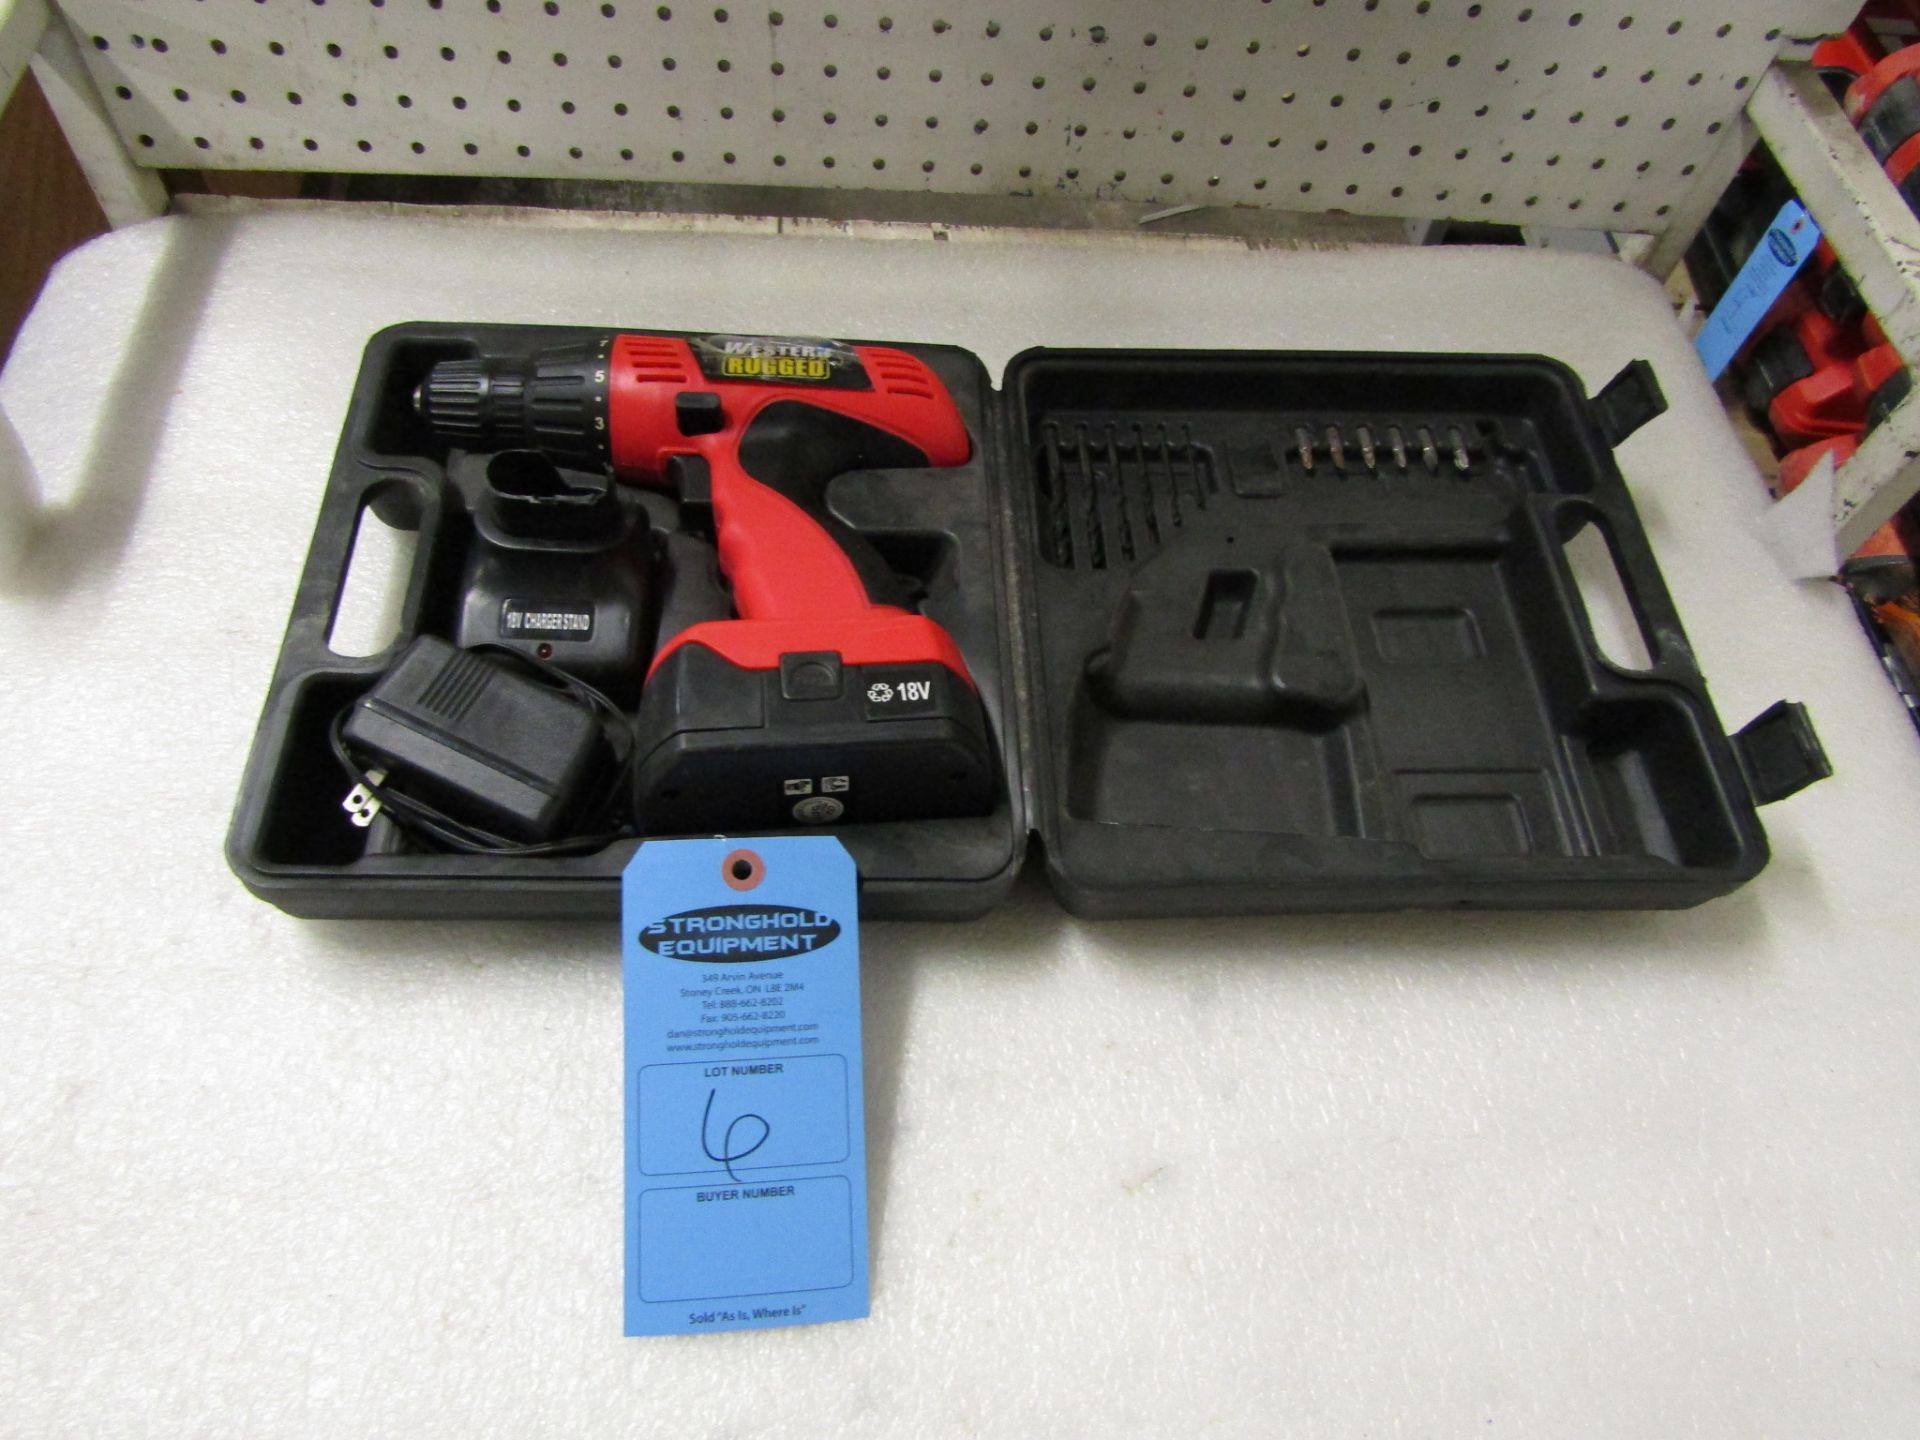 Western Rugged Cordless Drill with 18V battery and charger